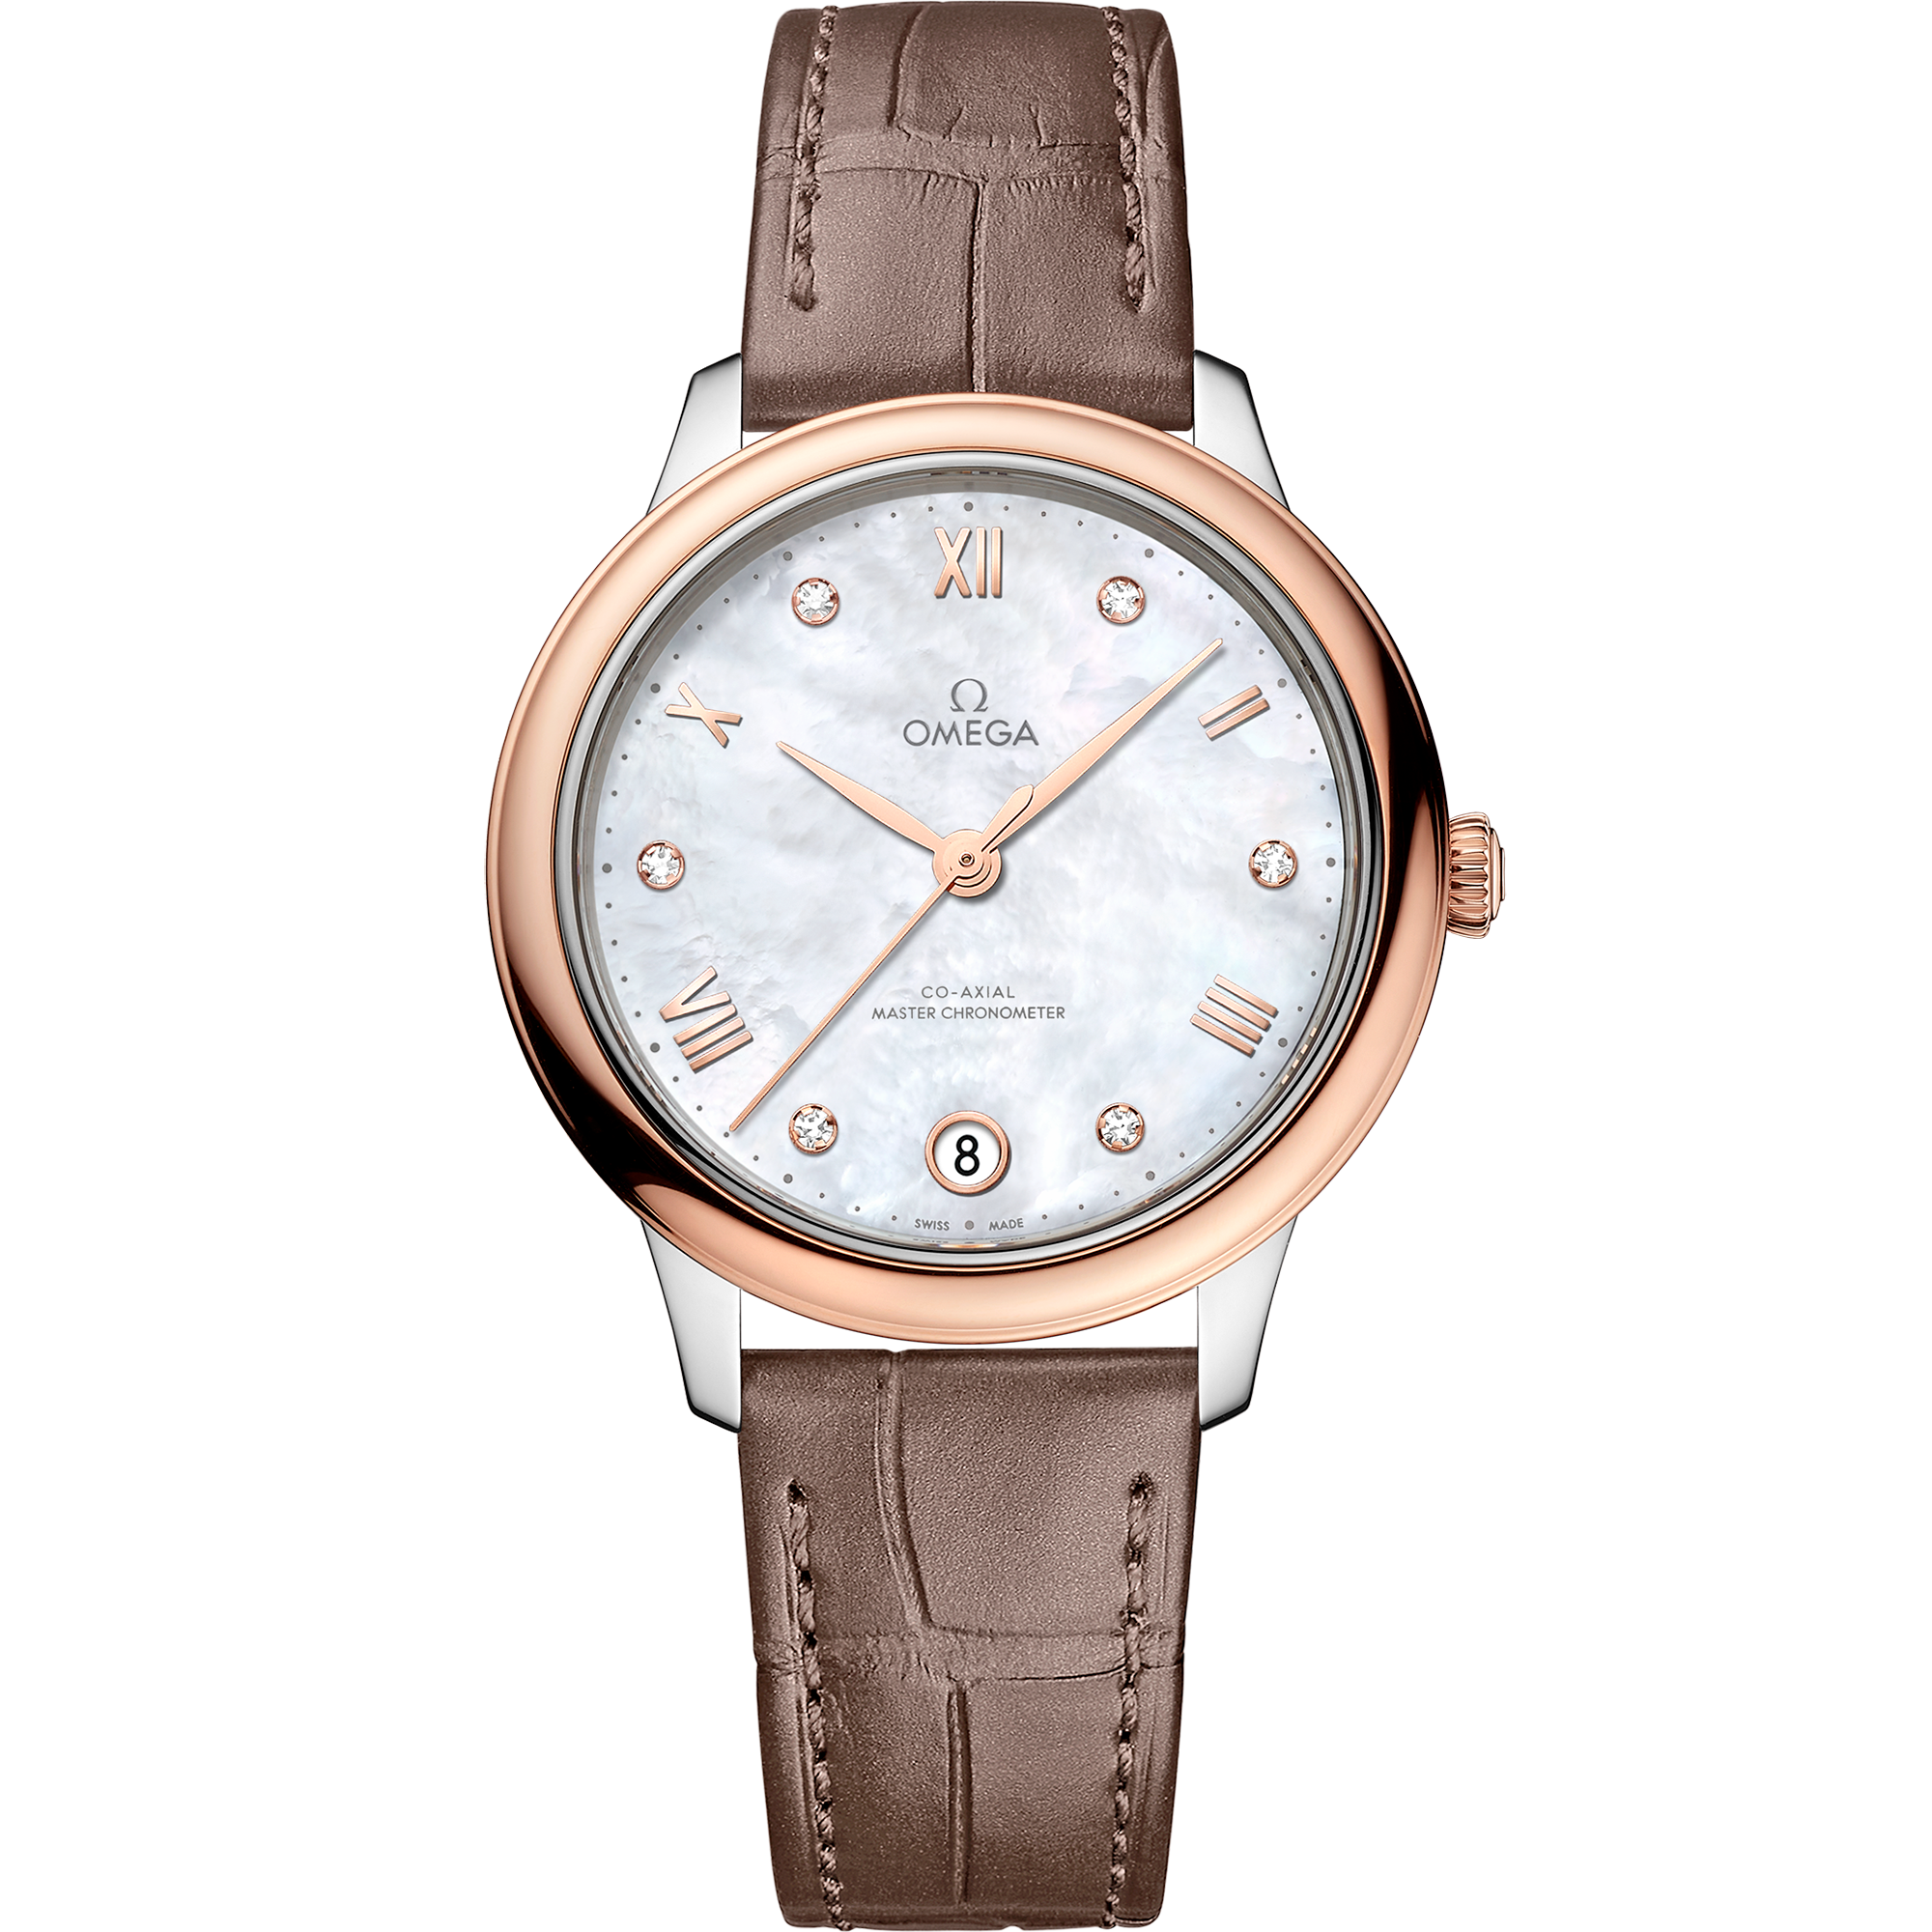 White dial watch on Steel - Sedna™ gold case with Leather strap - De Ville Prestige 34 mm, steel - Sedna™ gold on leather strap - 434.23.34.20.55.001